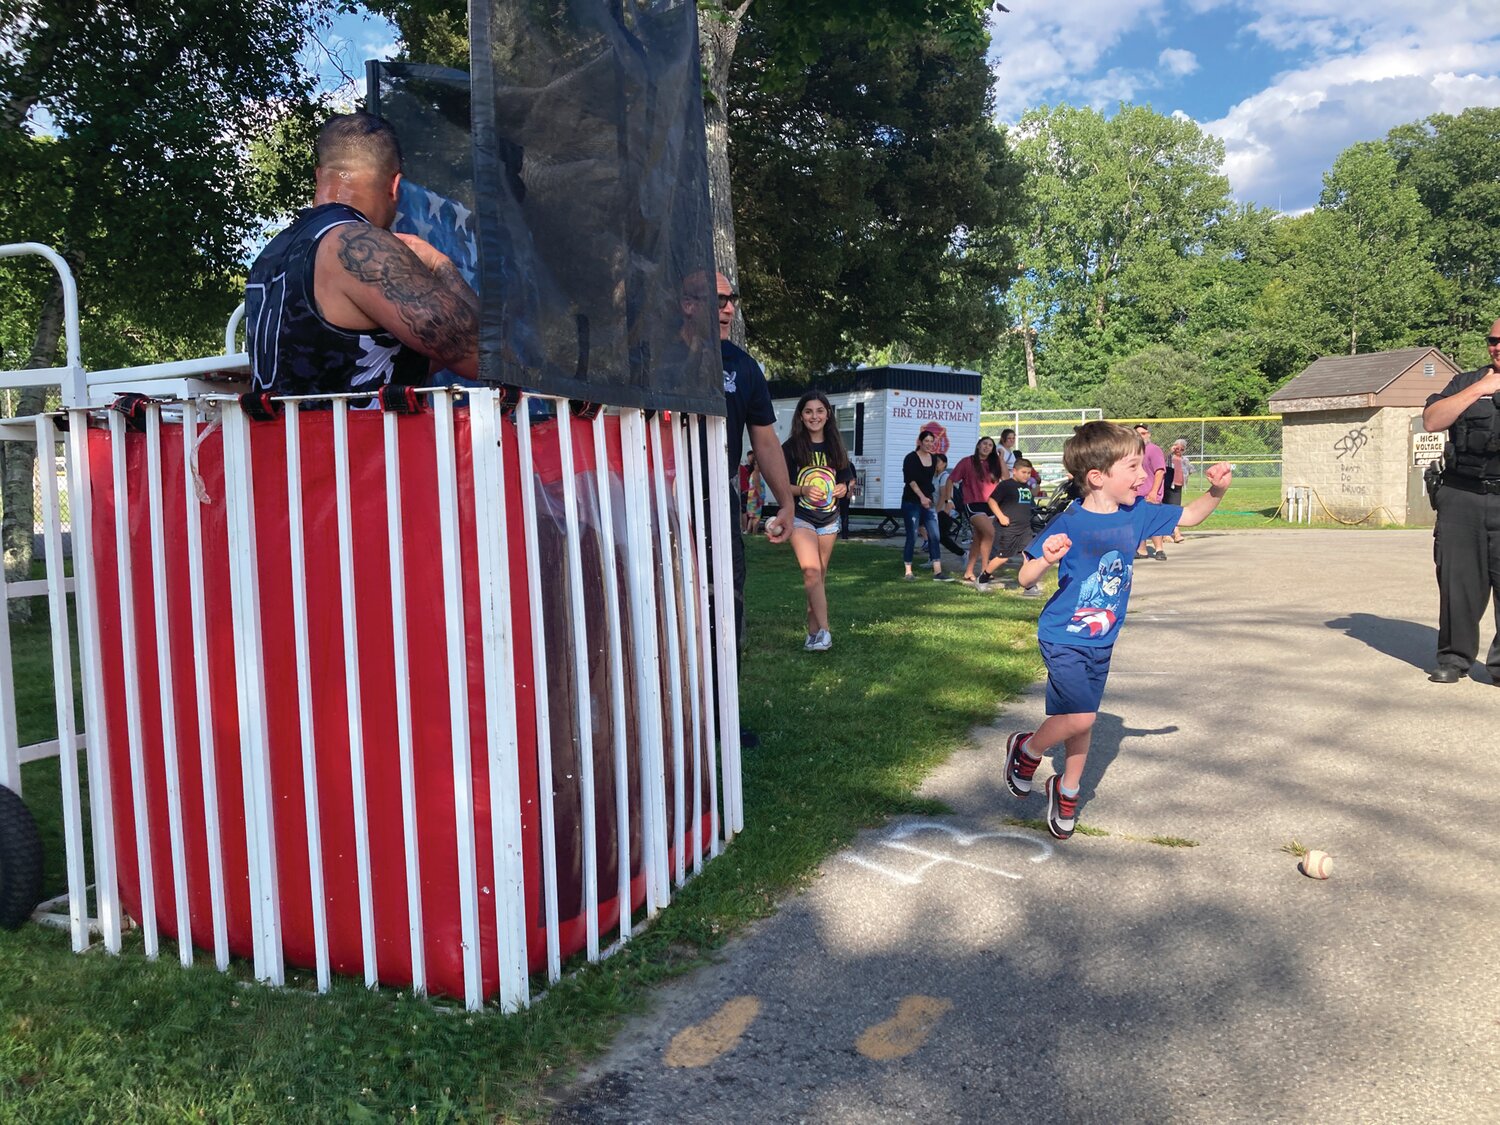 DUNK A COP: Children were thrilled to take their chance at hitting the target and dunking School Resource Officer Louis Cotoia into the cold waters of the dunk tank.